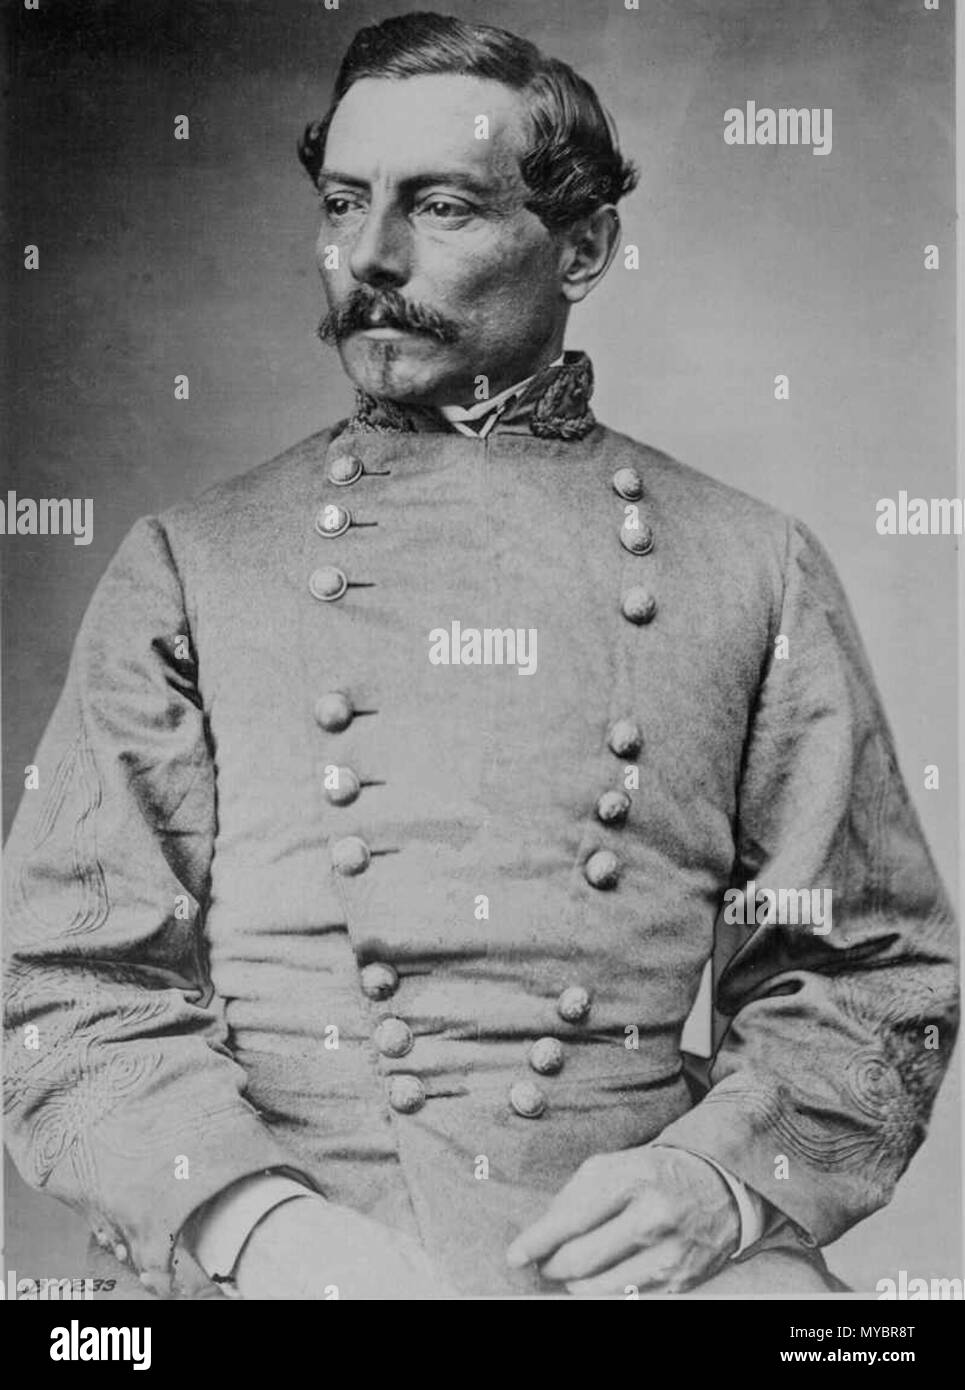 . Pierre Gustave Toutant de Beauregard, commander of confederated troops which attacked fort sumter in 1861. 19th century. This file is lacking author information. 96 Capitaine beauregard Stock Photo